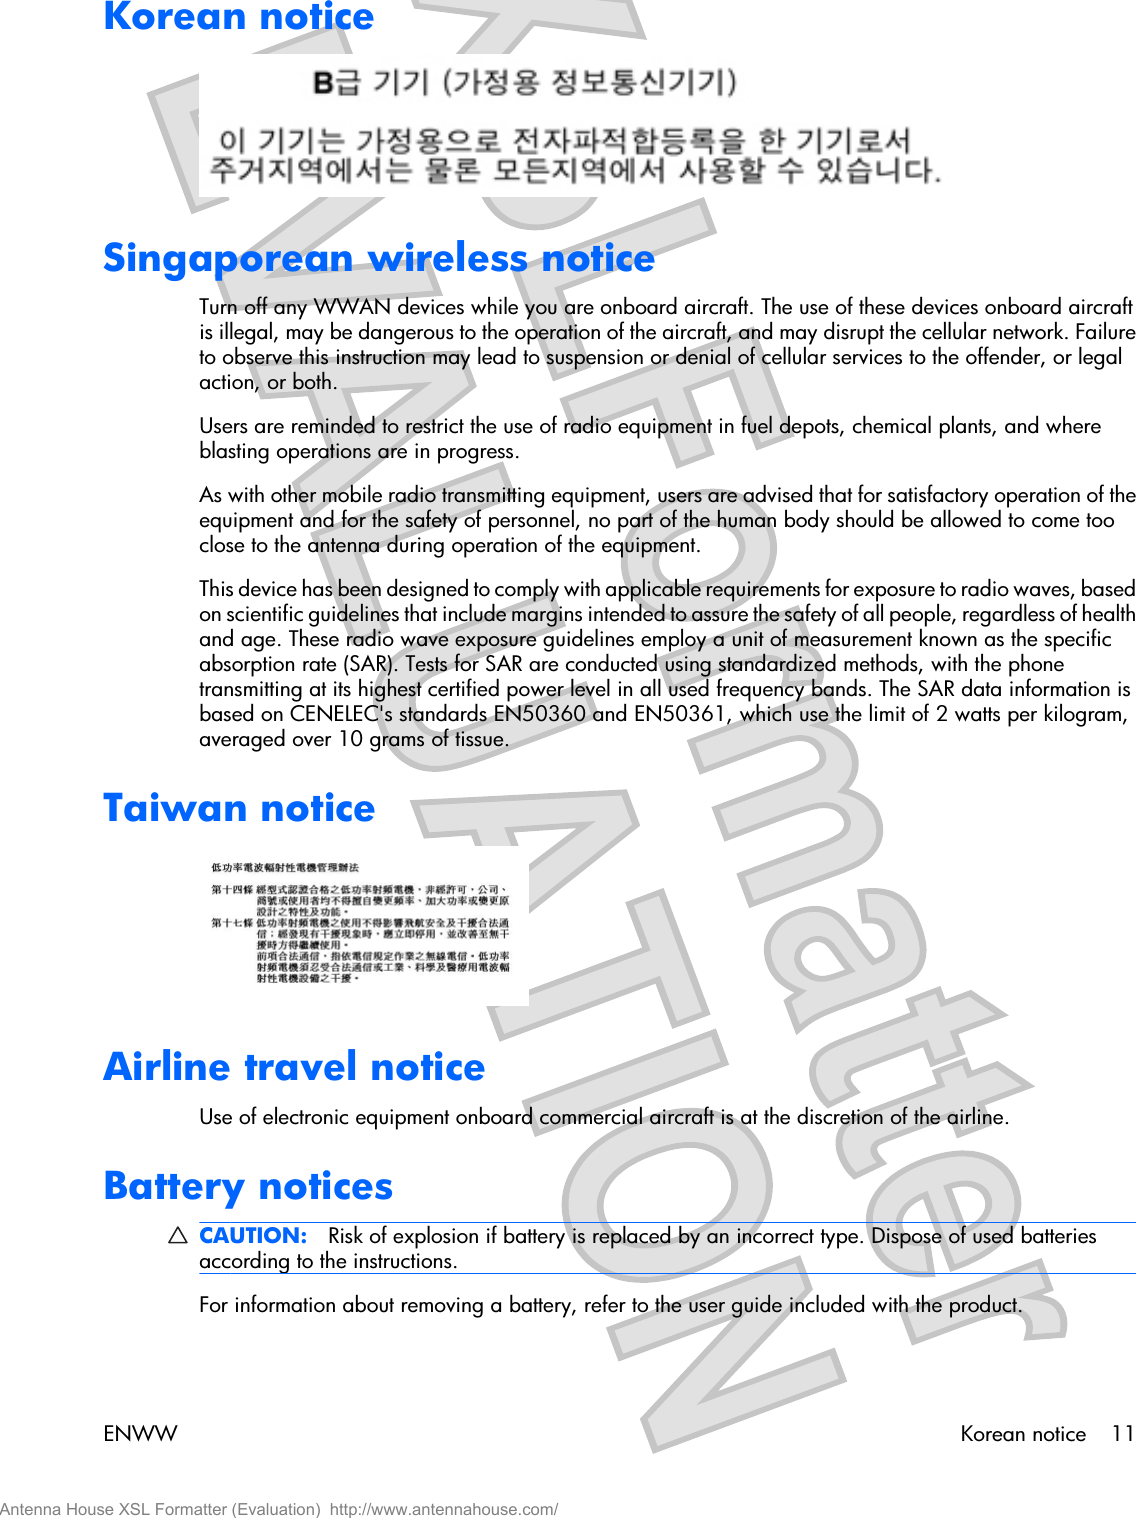 Korean noticeSingaporean wireless noticeTurn off any WWAN devices while you are onboard aircraft. The use of these devices onboard aircraftis illegal, may be dangerous to the operation of the aircraft, and may disrupt the cellular network. Failureto observe this instruction may lead to suspension or denial of cellular services to the offender, or legalaction, or both.Users are reminded to restrict the use of radio equipment in fuel depots, chemical plants, and whereblasting operations are in progress.As with other mobile radio transmitting equipment, users are advised that for satisfactory operation of theequipment and for the safety of personnel, no part of the human body should be allowed to come tooclose to the antenna during operation of the equipment.This device has been designed to comply with applicable requirements for exposure to radio waves, basedon scientific guidelines that include margins intended to assure the safety of all people, regardless of healthand age. These radio wave exposure guidelines employ a unit of measurement known as the specificabsorption rate (SAR). Tests for SAR are conducted using standardized methods, with the phonetransmitting at its highest certified power level in all used frequency bands. The SAR data information isbased on CENELEC&apos;s standards EN50360 and EN50361, which use the limit of 2 watts per kilogram,averaged over 10 grams of tissue.Taiwan noticeAirline travel noticeUse of electronic equipment onboard commercial aircraft is at the discretion of the airline.Battery noticesCAUTION: Risk of explosion if battery is replaced by an incorrect type. Dispose of used batteriesaccording to the instructions.For information about removing a battery, refer to the user guide included with the product.ENWW Korean notice 11Antenna House XSL Formatter (Evaluation)  http://www.antennahouse.com/